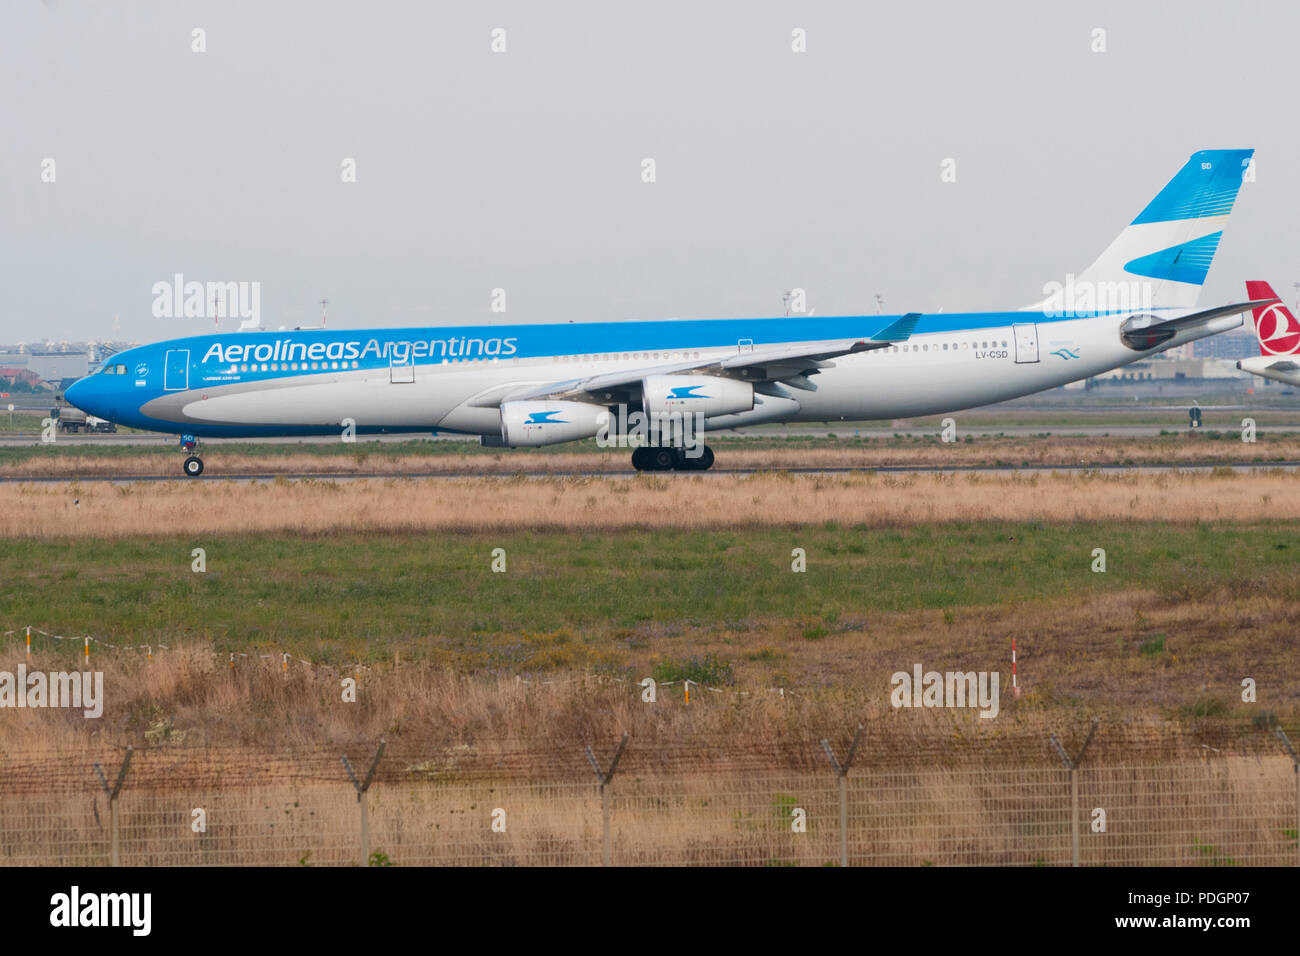 ROME, ITALY - JULY 11, 2013 - An Aerolineas Argentinas Airbus A-340 in preparation for take-off at the Fiumicino airport in Rome Stock Photo